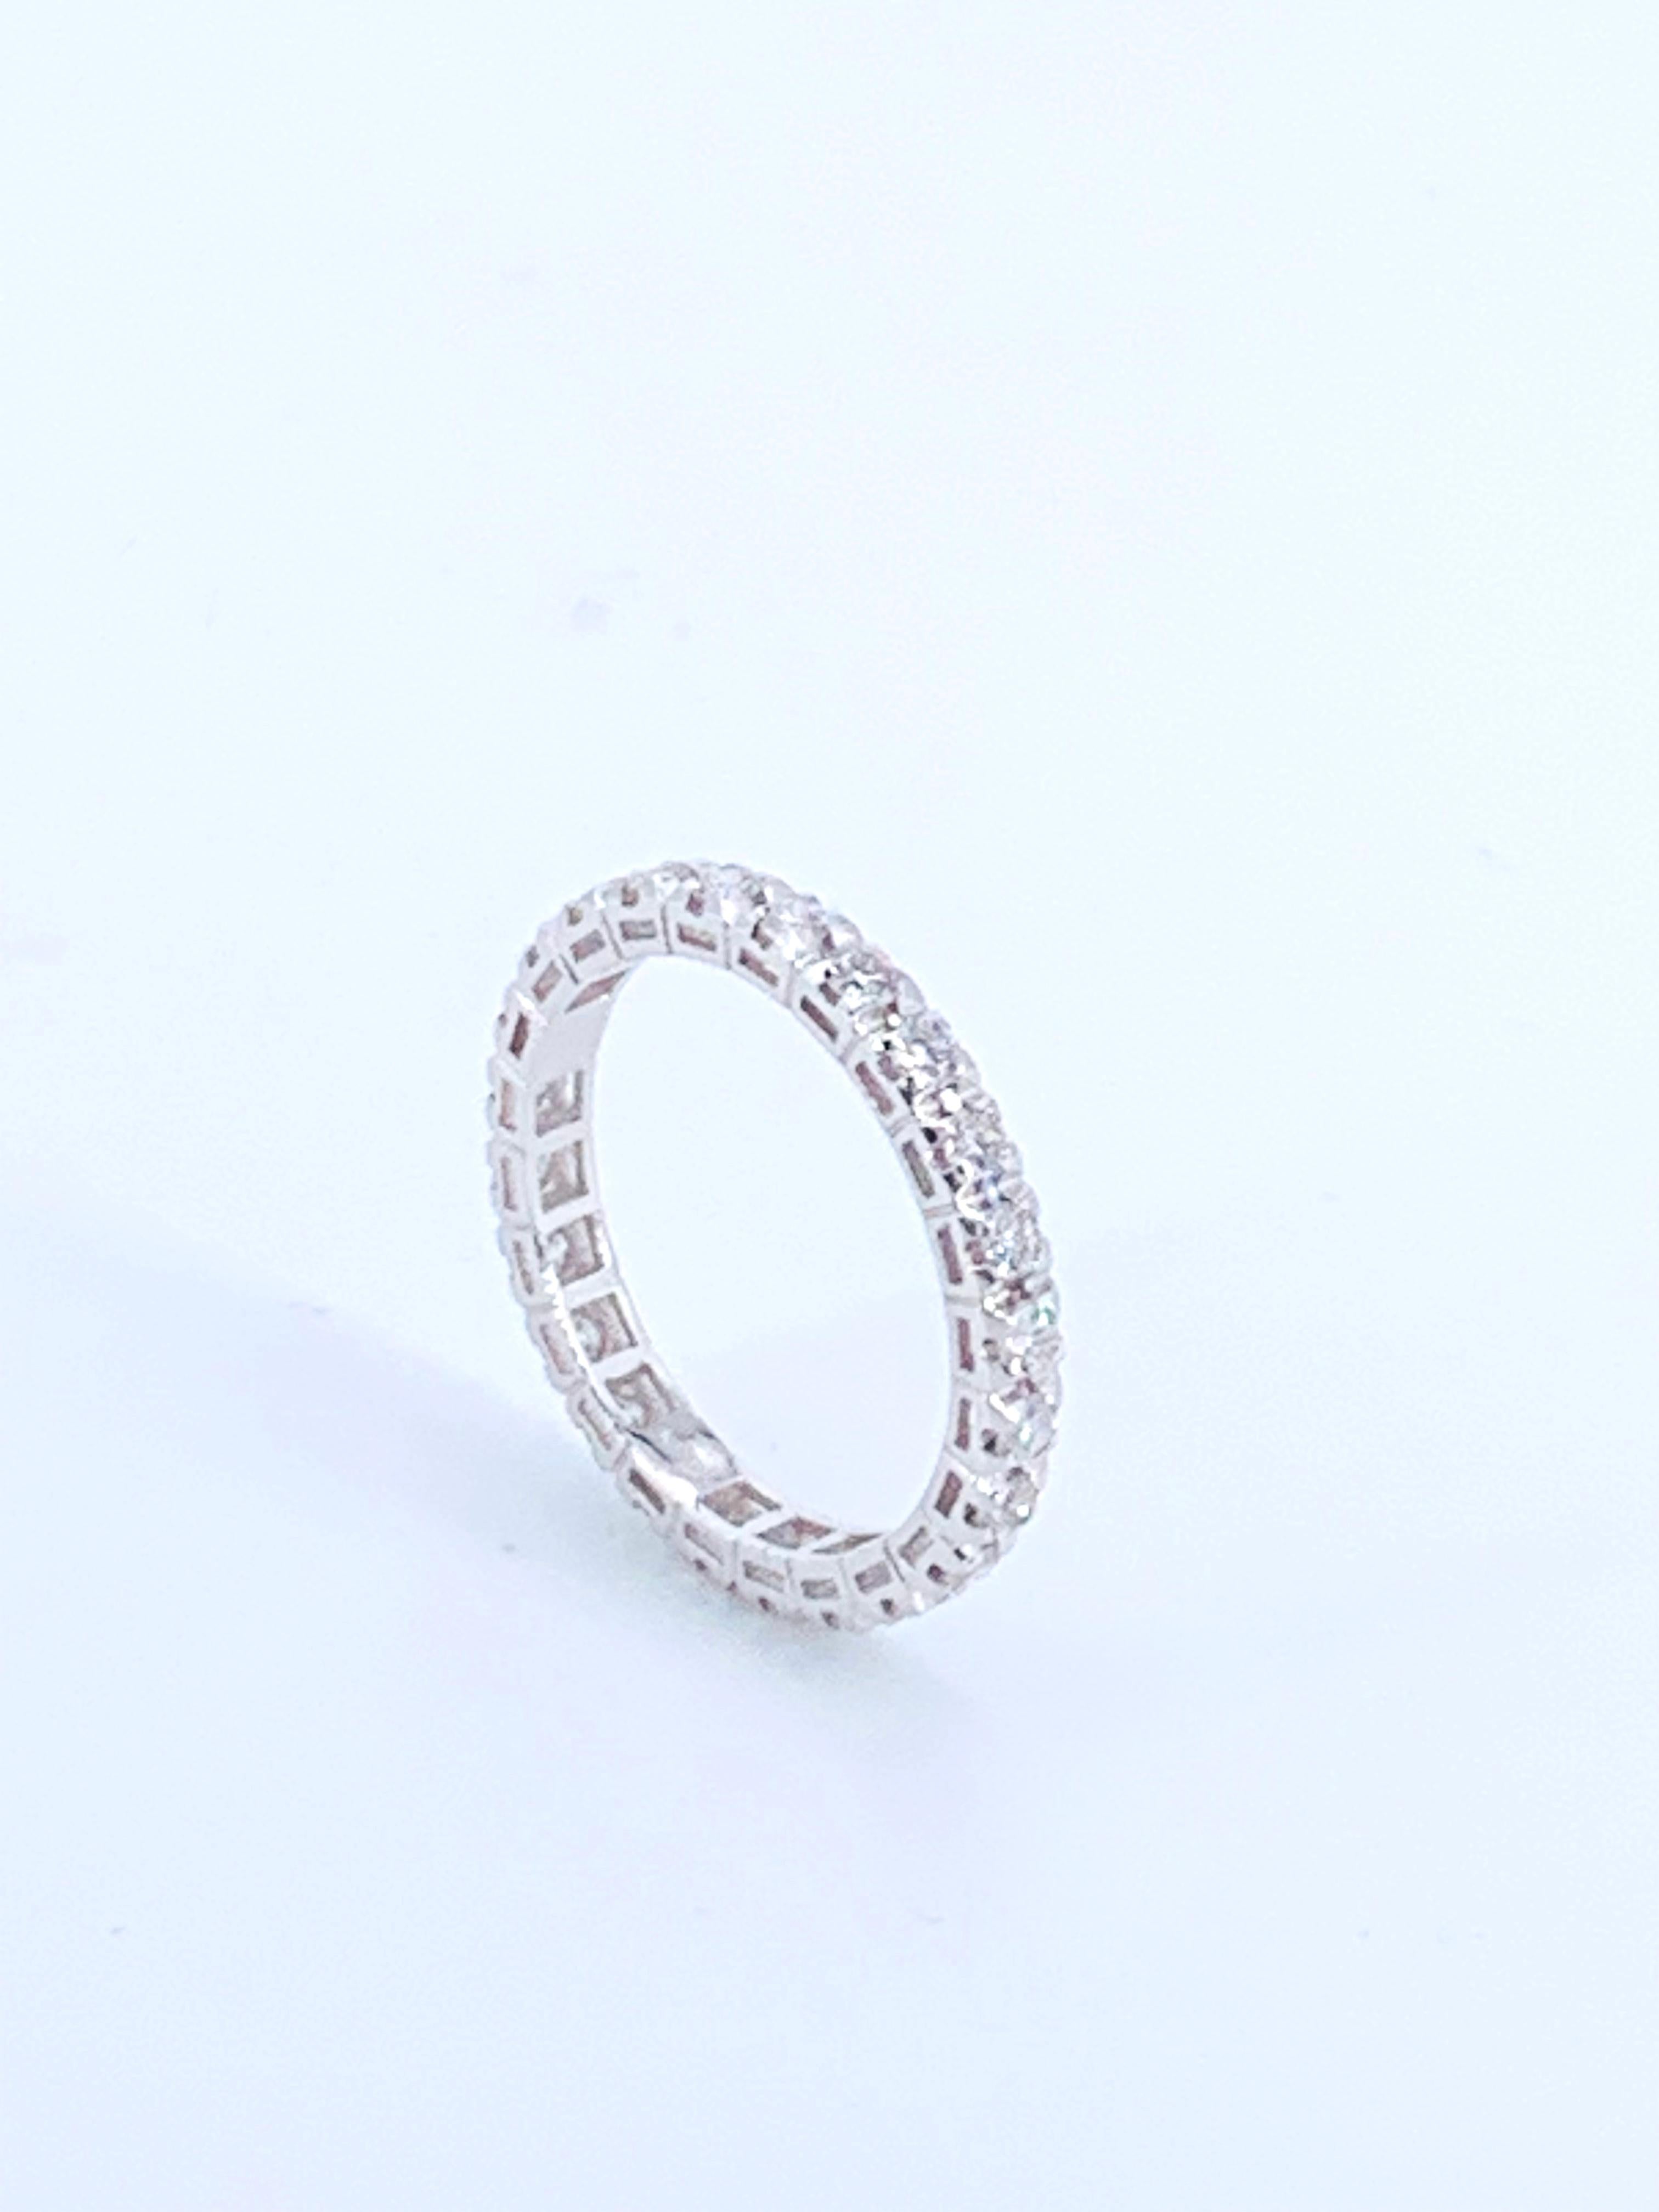 This 0.83 Carat Diamond Eternity Ring is of a fabulous quality and size for either a man or woman. 

It sparkles beautiful natural Diamonds throughout the ring, gifting light and beauty to the finger from every angle. 

Set in 18Kt white Gold it